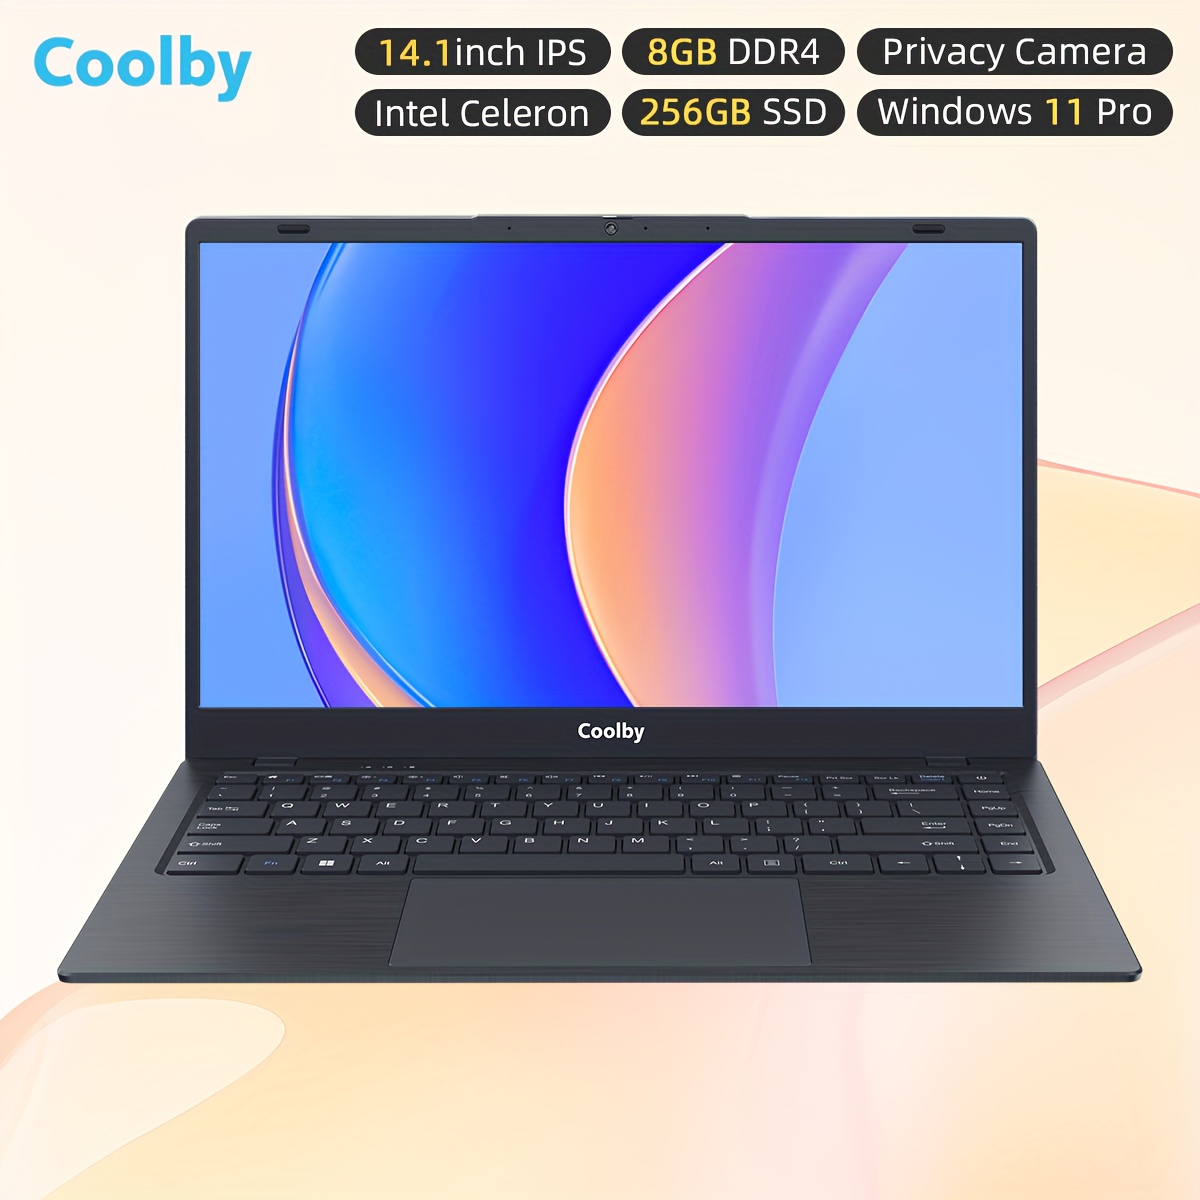 jumper Laptop 14 Inch, 12GB DDR4 256GB SSD, Intel Celeron Quad Core CPU,  Lightweight Computer with FHD 1080p Display, Windows 11 Laptops, Dual-Band